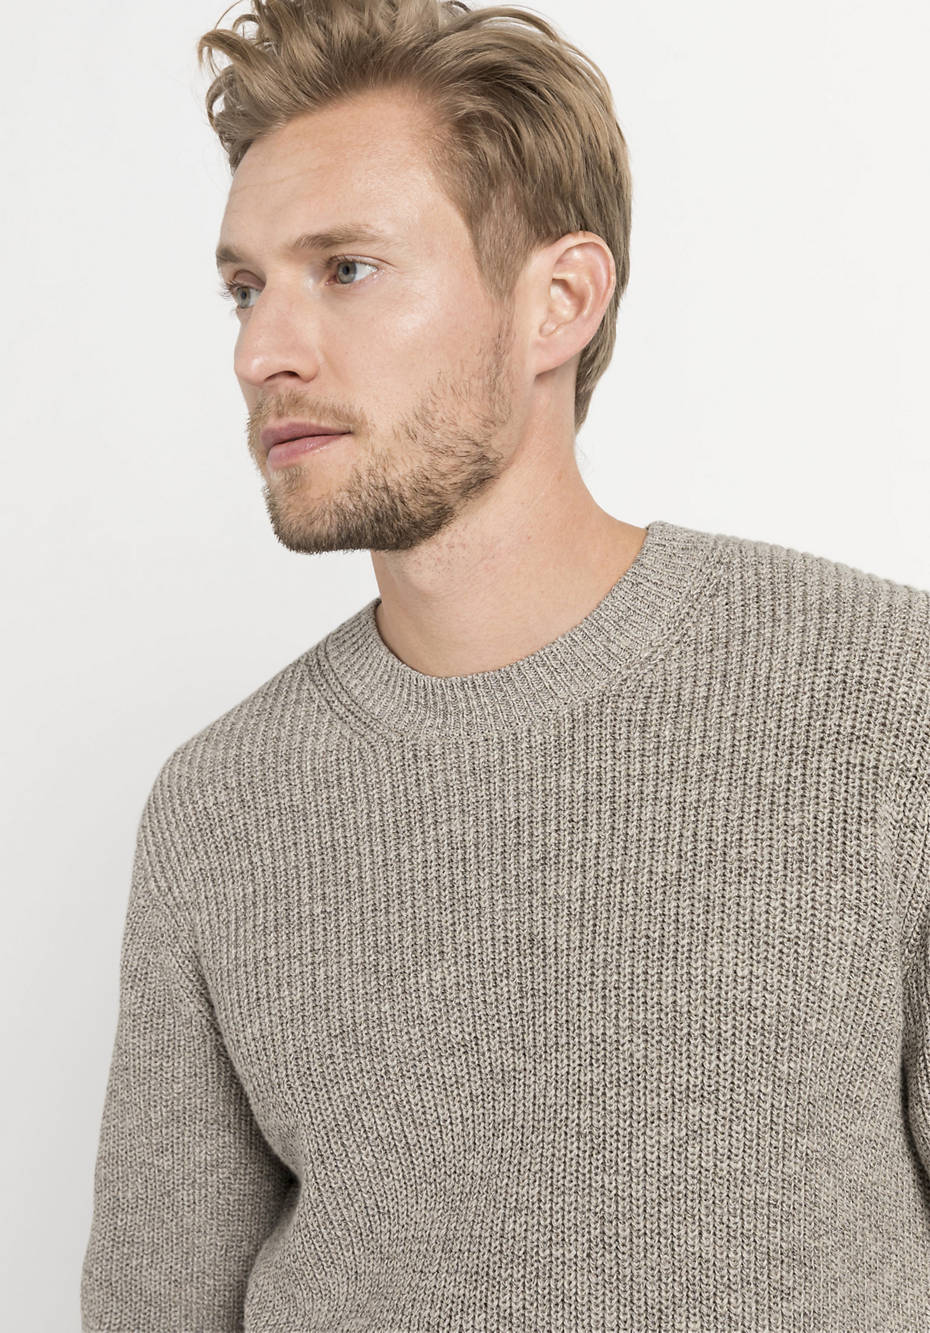 Organic cotton and linen sweater